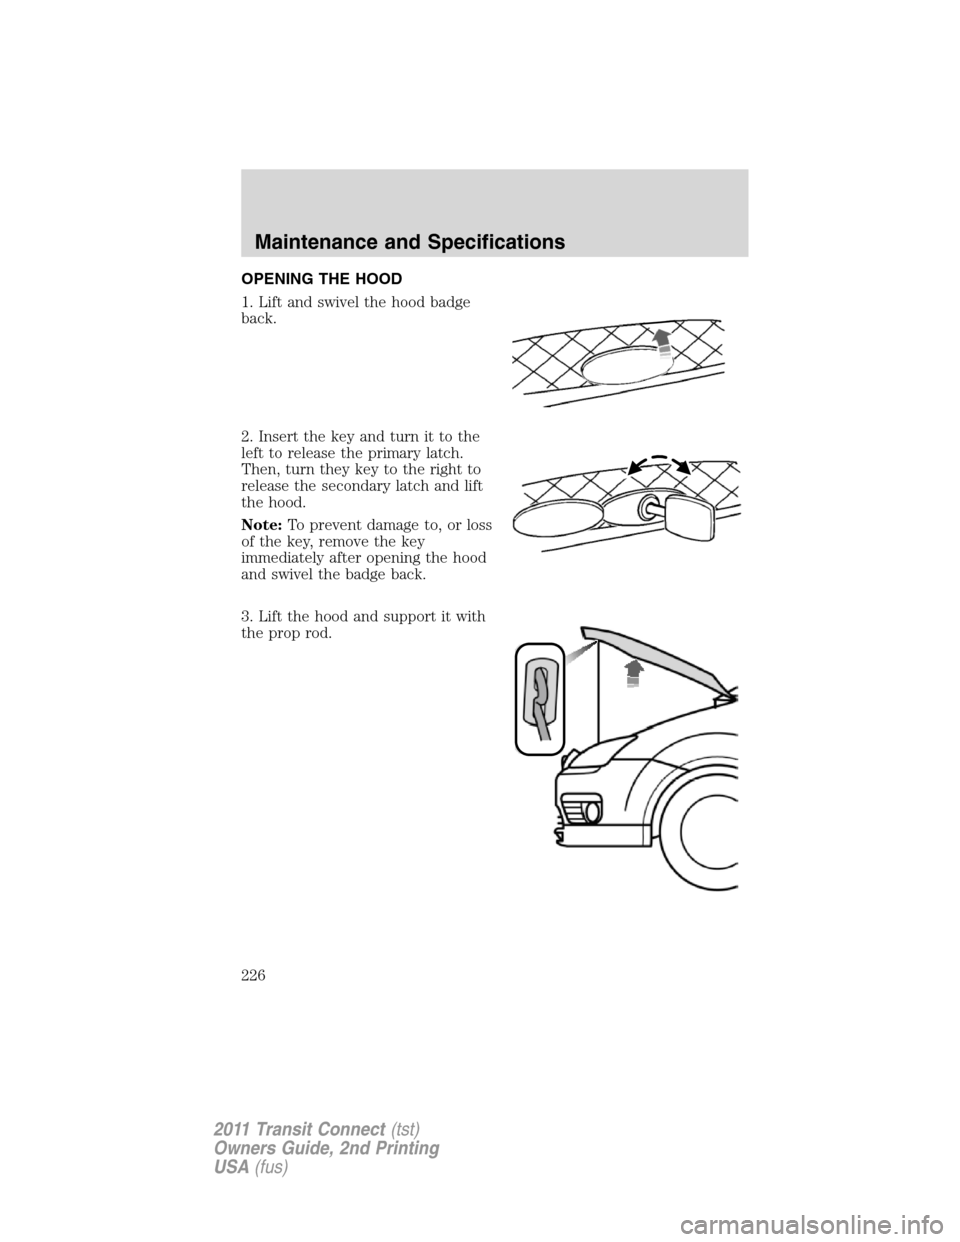 FORD TRANSIT CONNECT 2011 1.G Owners Manual OPENING THE HOOD
1. Lift and swivel the hood badge
back.
2. Insert the key and turn it to the
left to release the primary latch.
Then, turn they key to the right to
release the secondary latch and lif